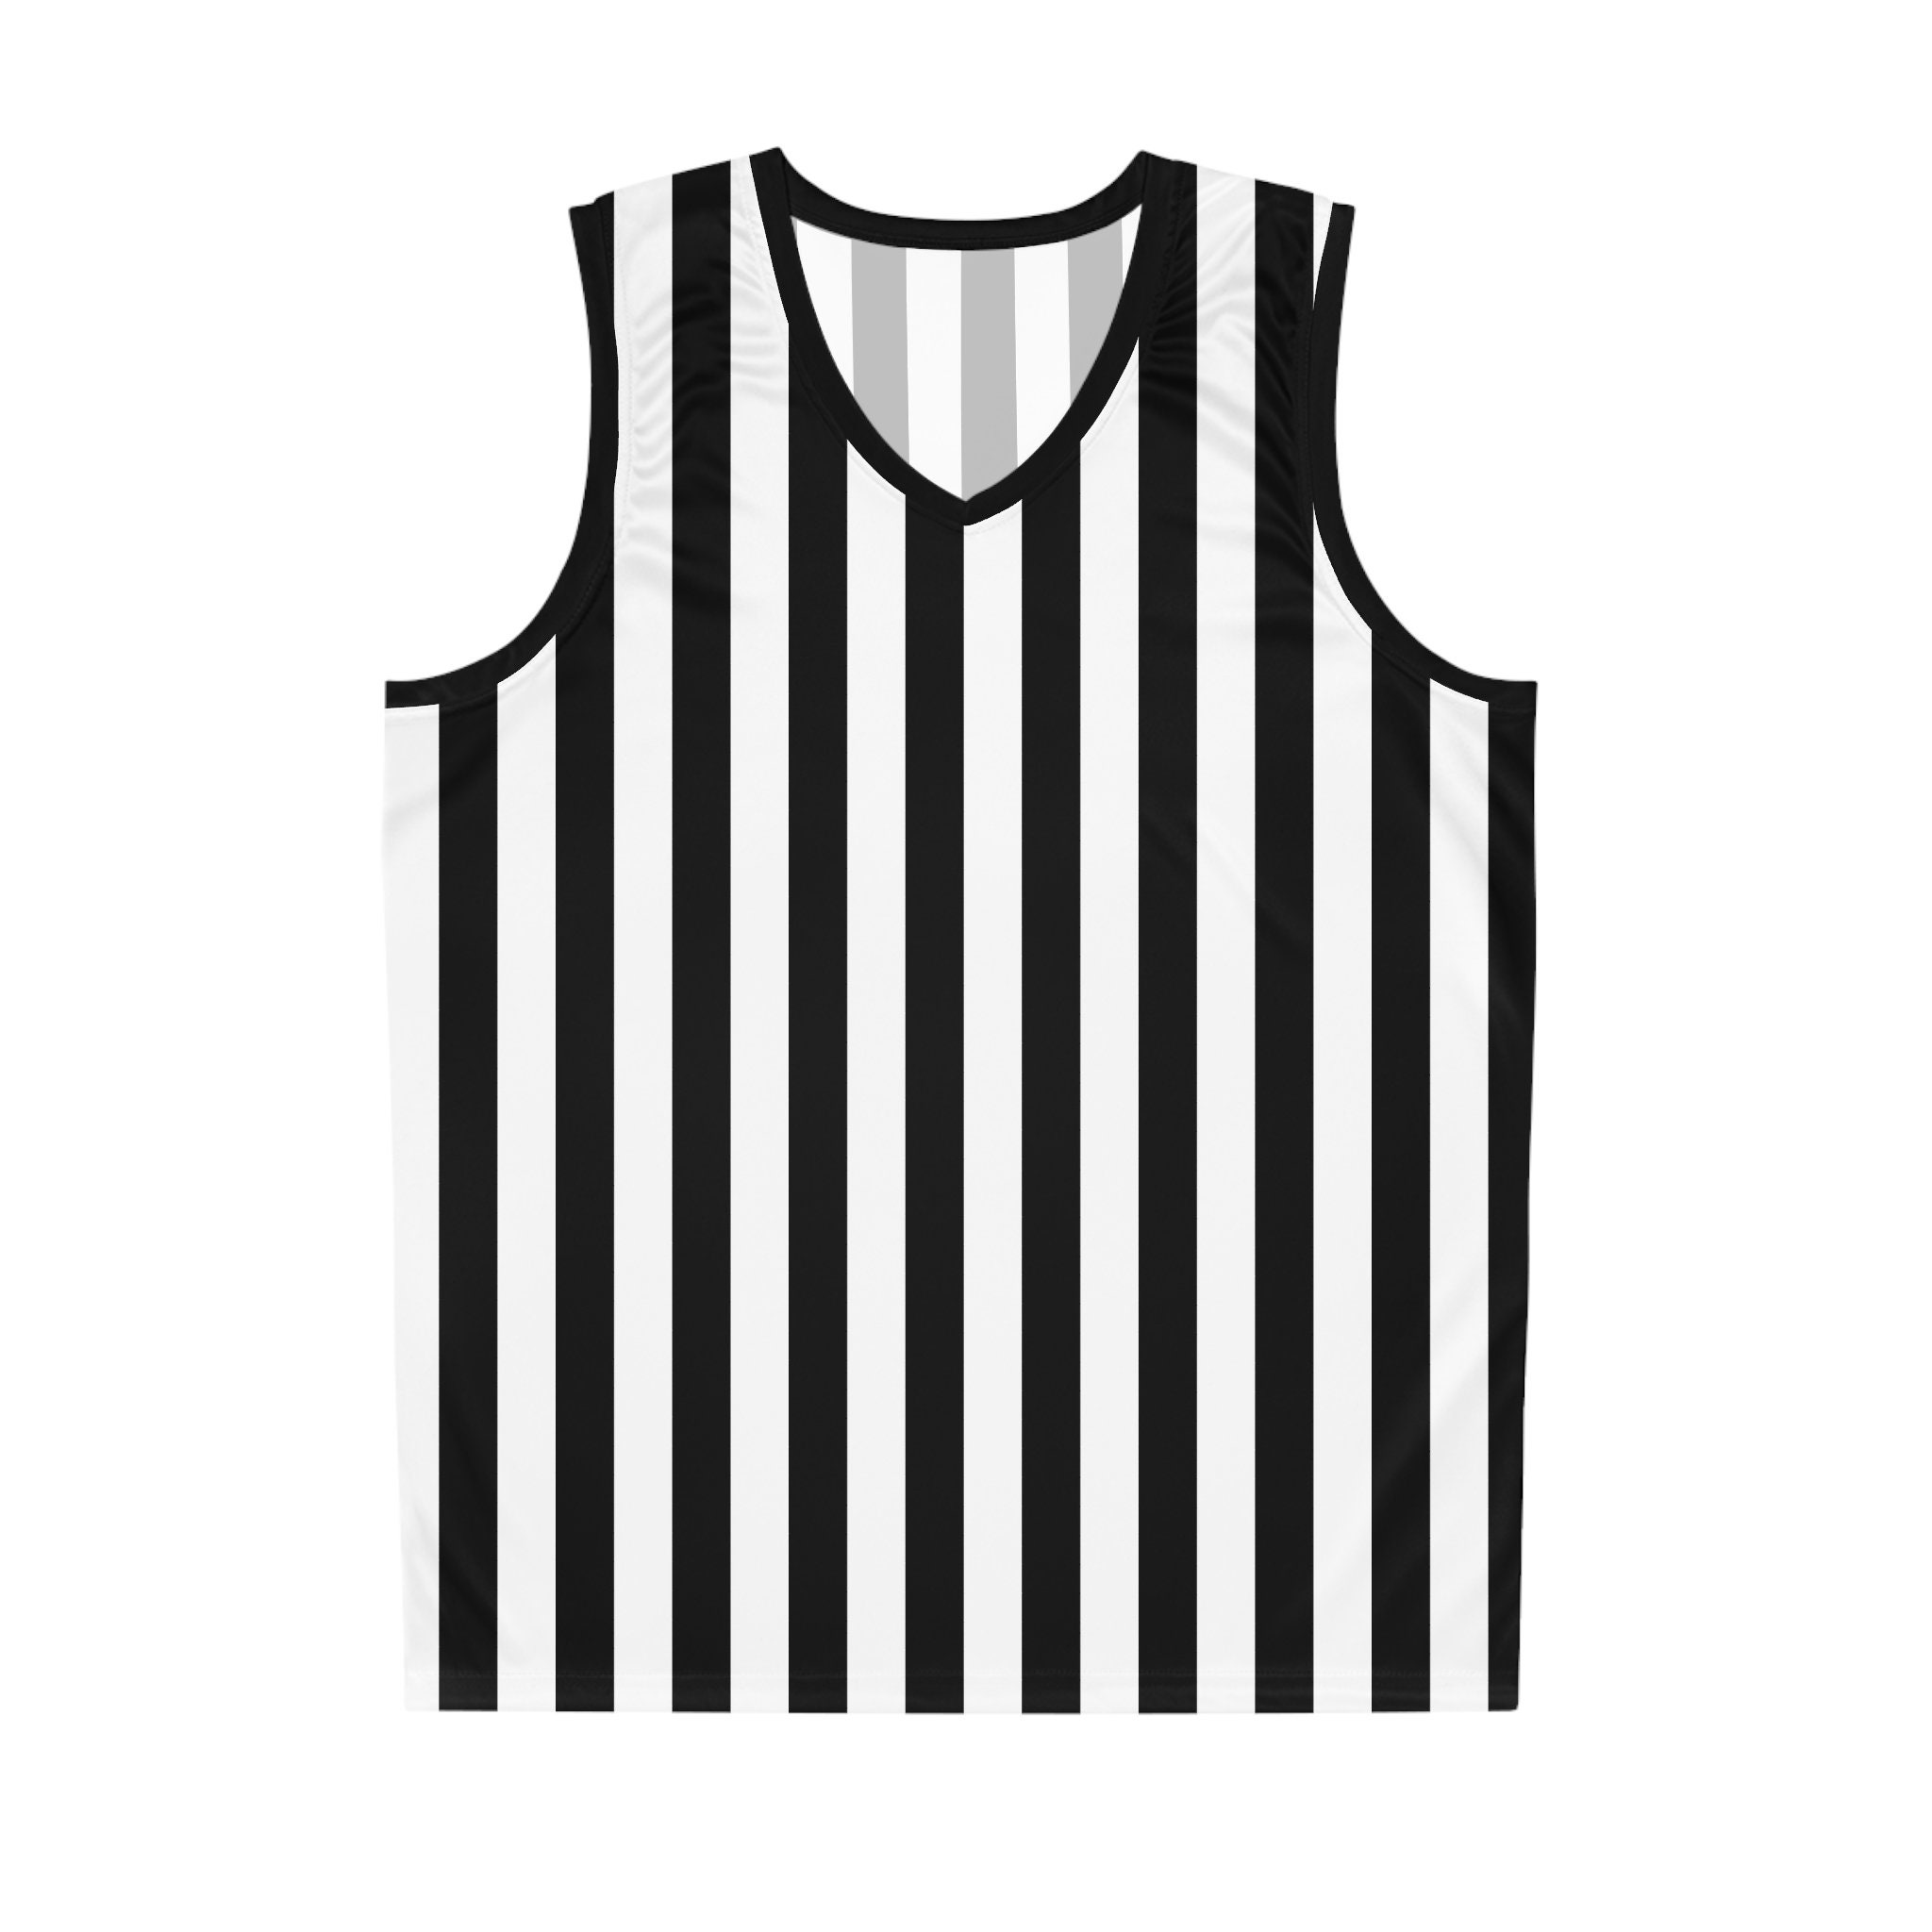  Halloween Kids Referee Costume Set White Black Stripe Umpire  Jersey Overturned Collar Referee Shirt Stainless Steel Whistle with Lanyard  Hat for Basketball Football Soccer(X-Small) : Sports & Outdoors